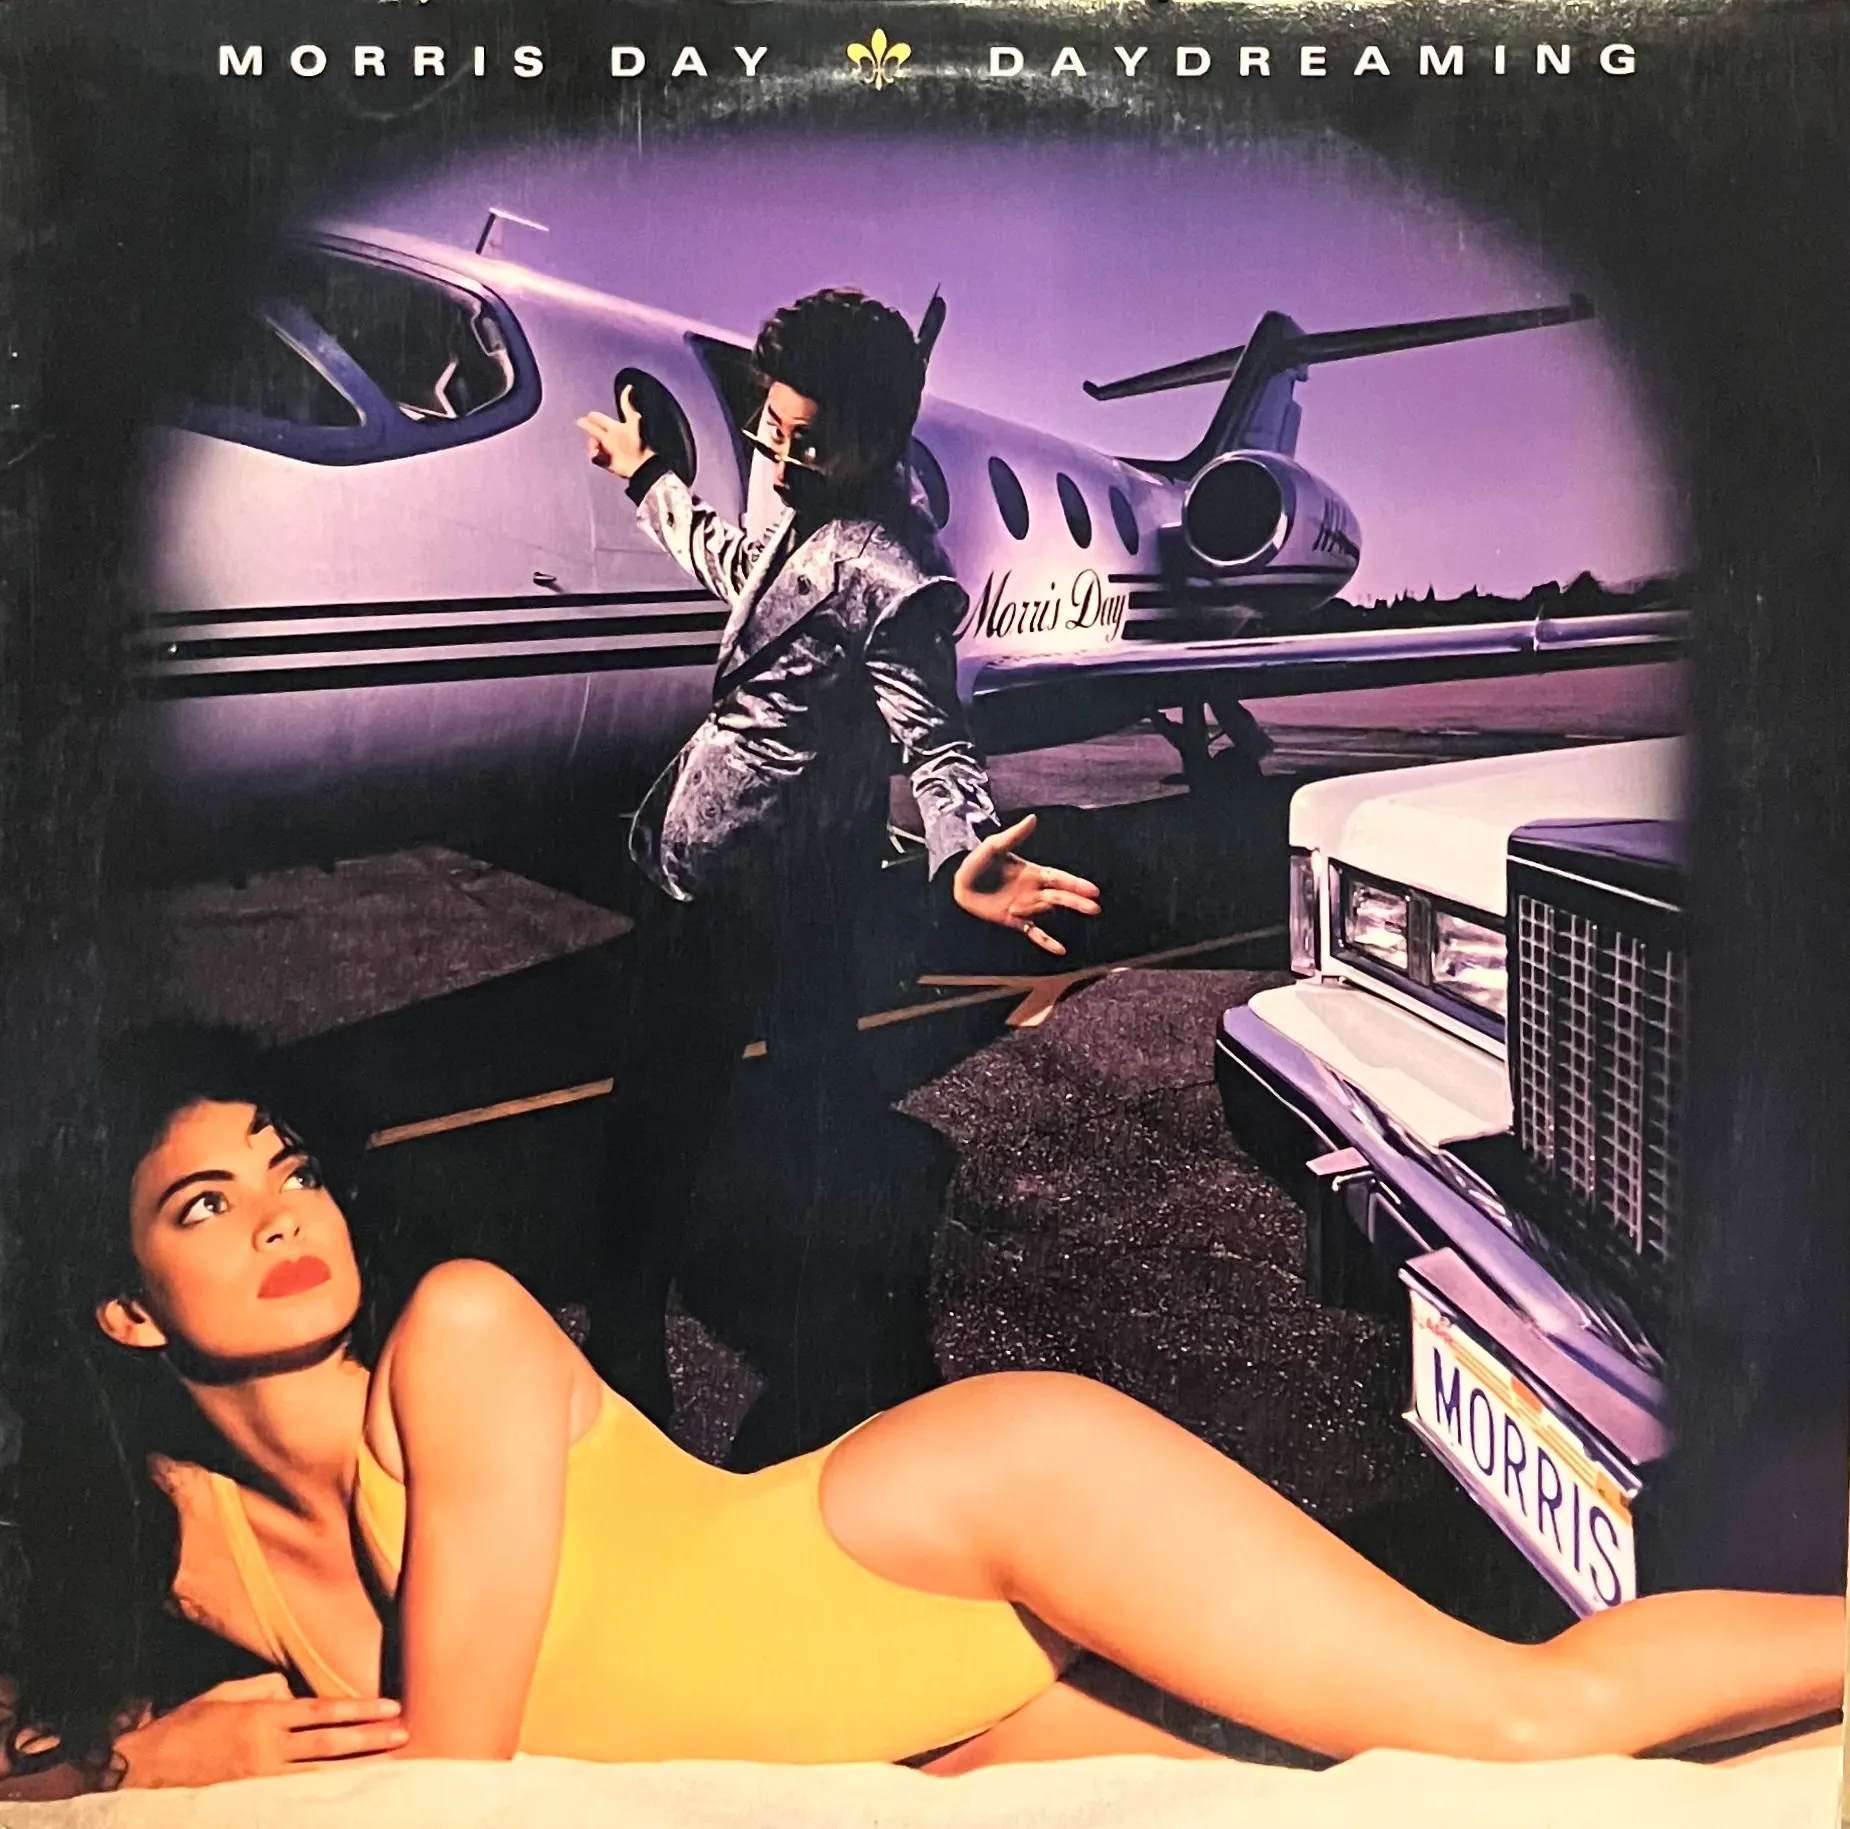 MORRIS DAY / DAYDREAMING